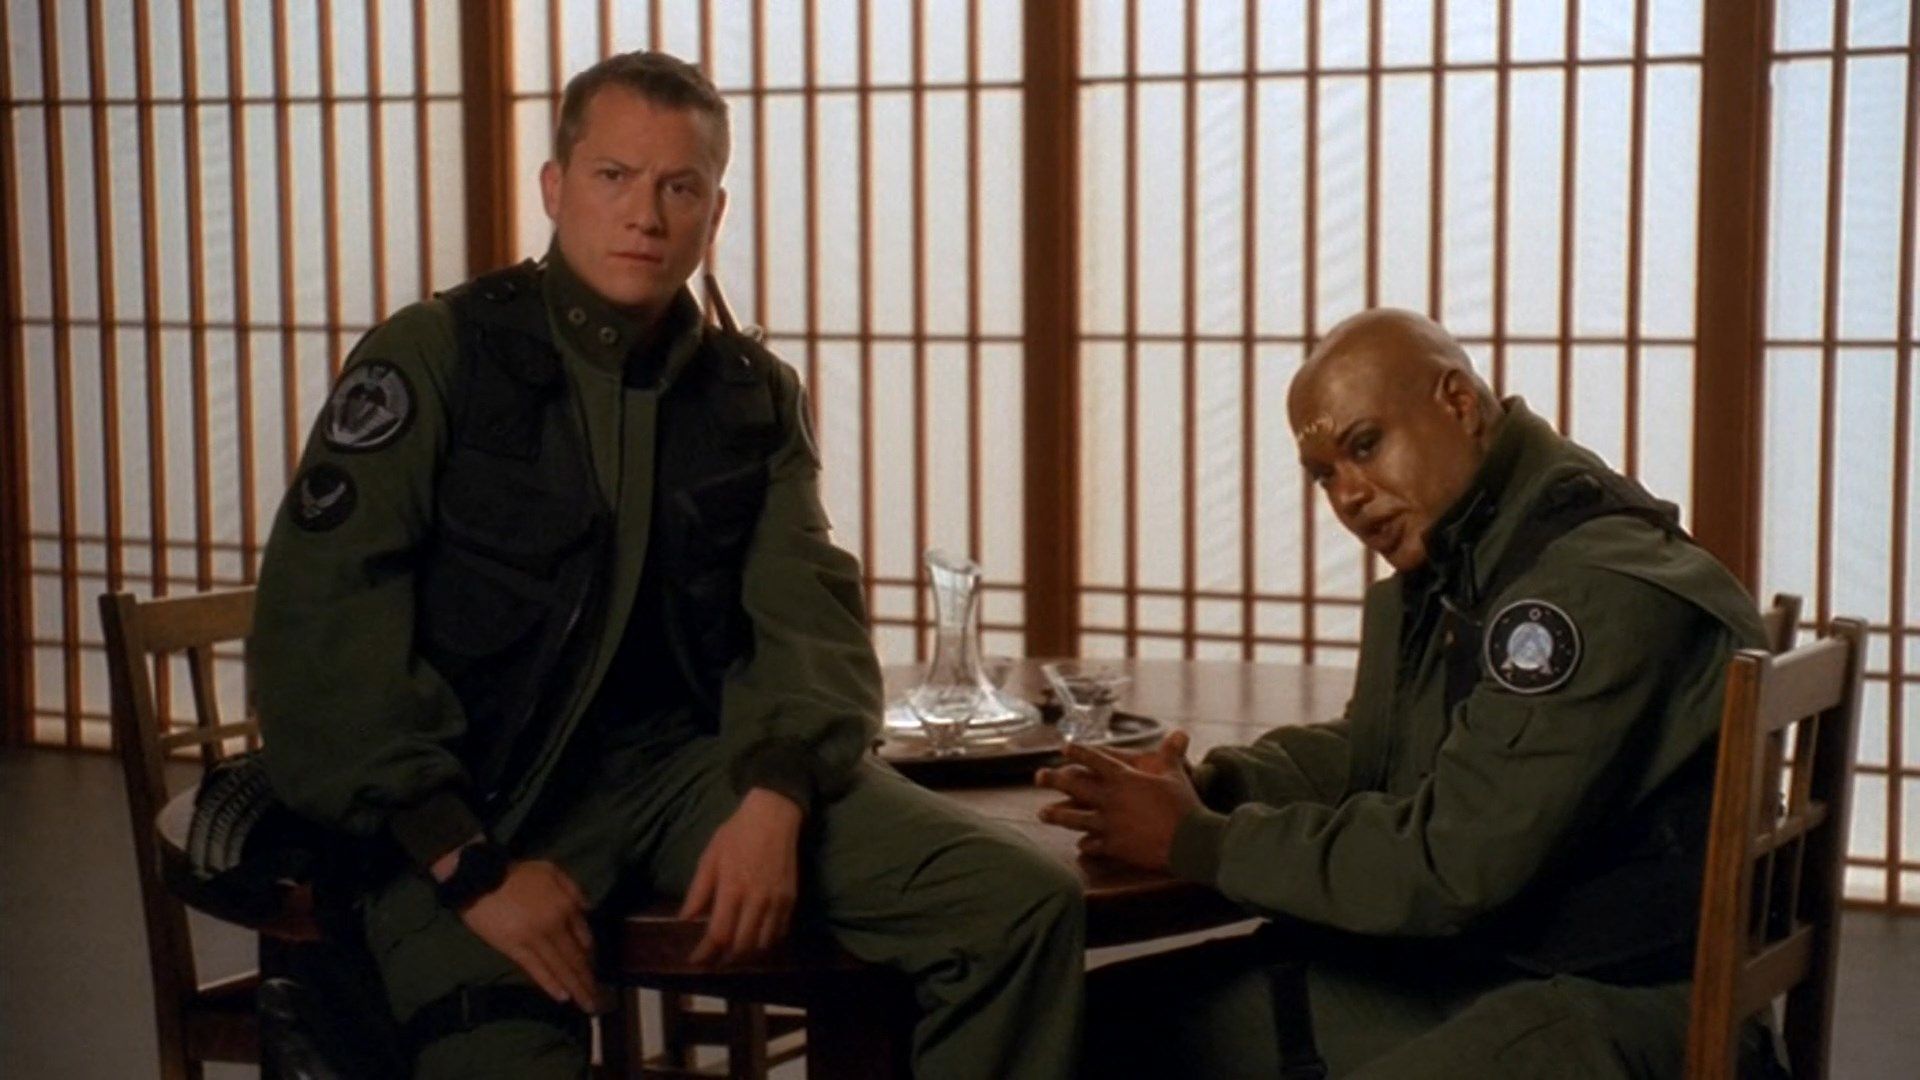 Jonas Quinn (Corin Nemec) sits on a table and Teal'c (Christopher Judge) sits on a chair next to him.